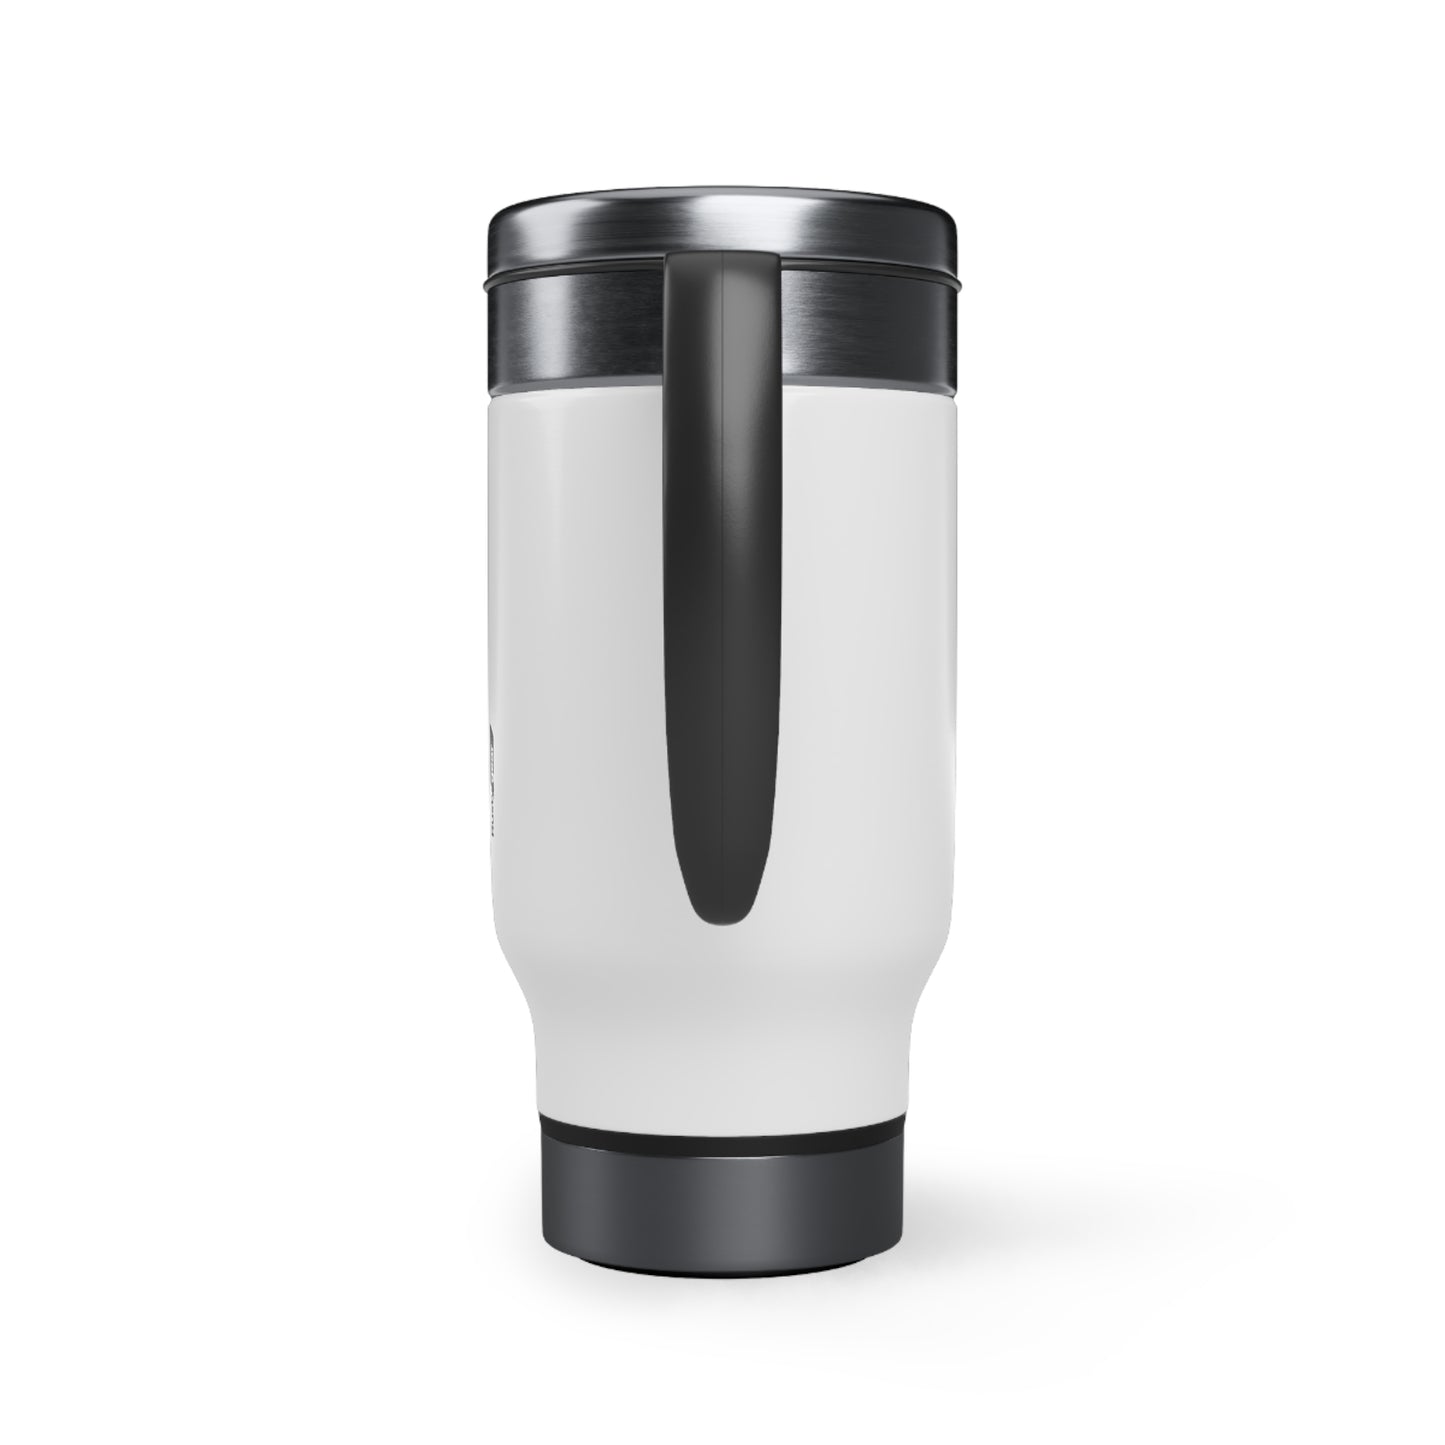 Scruffy Puppy Stainless Steel Travel Mug with Handle, 14oz